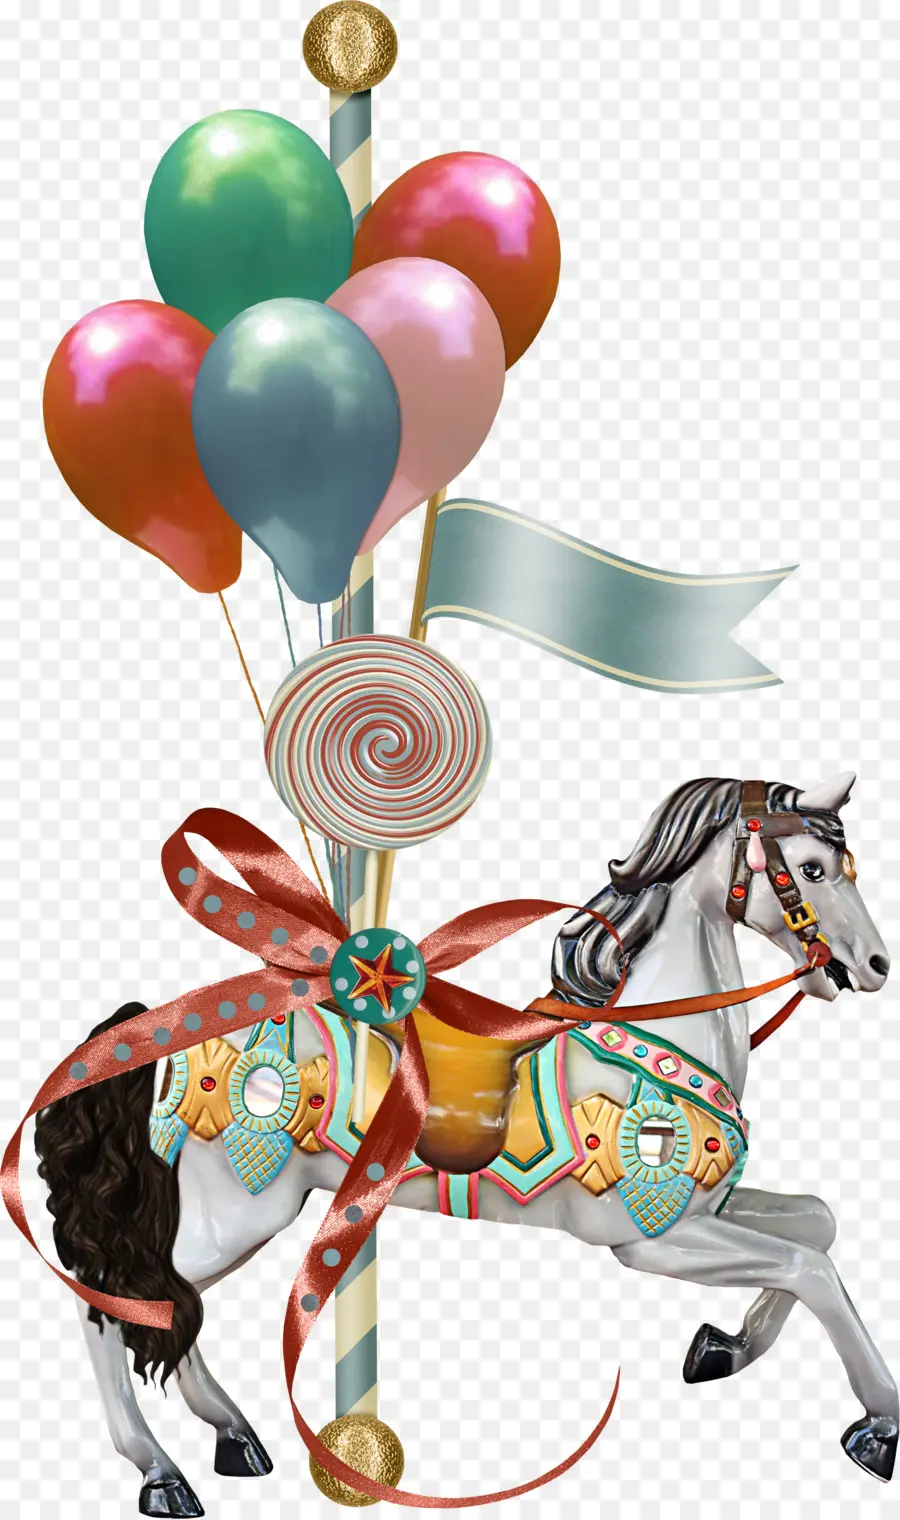 Caballo，Carrusel PNG